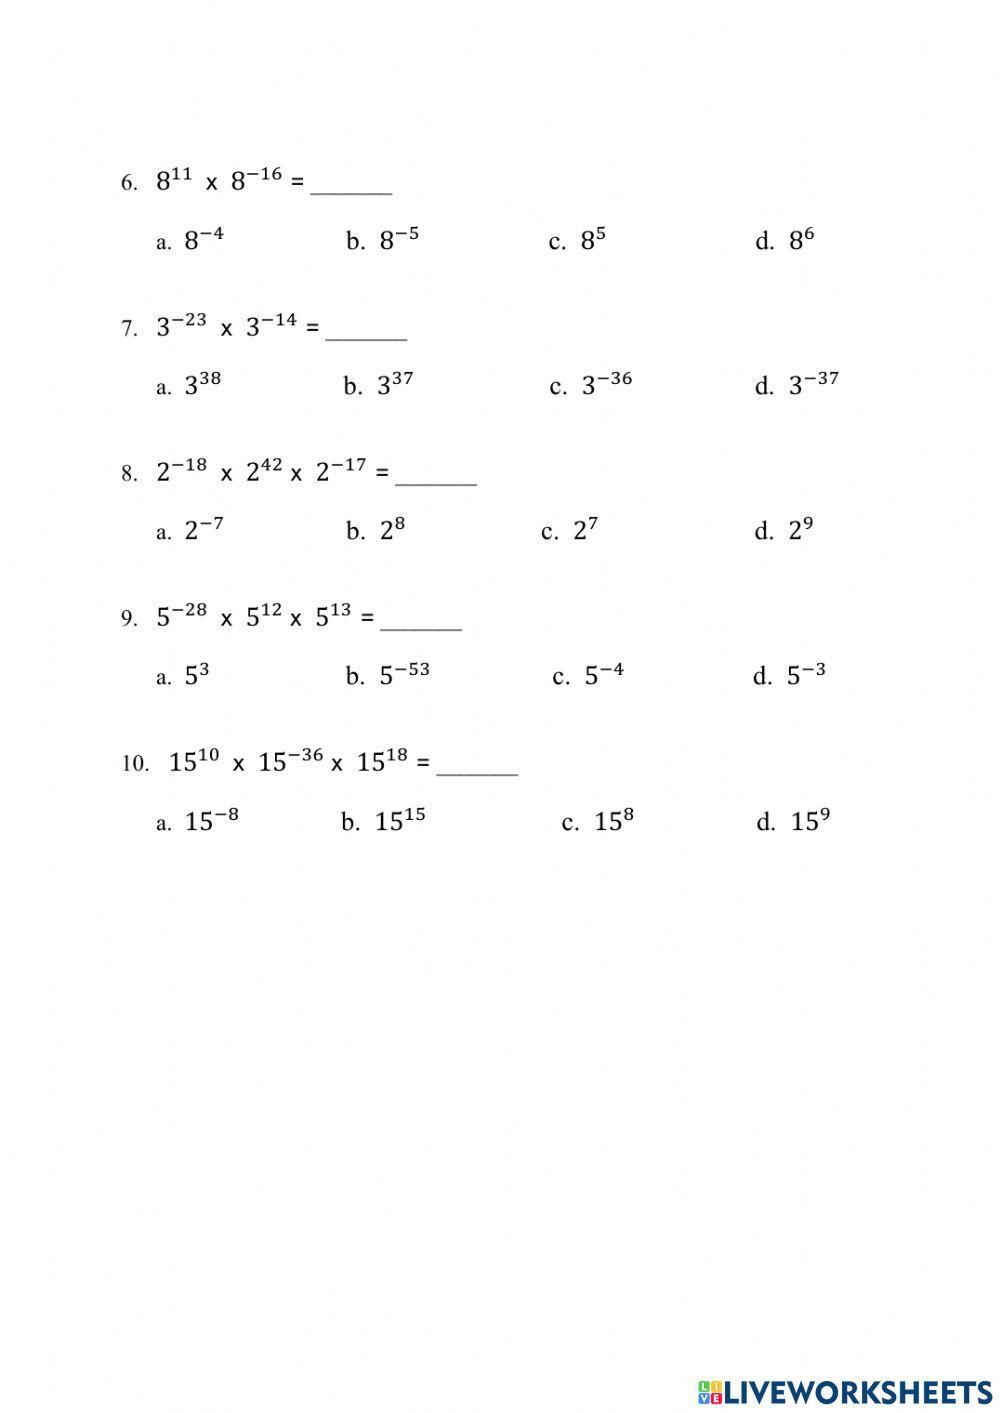 Product Rule (Laws of Exponents) worksheet